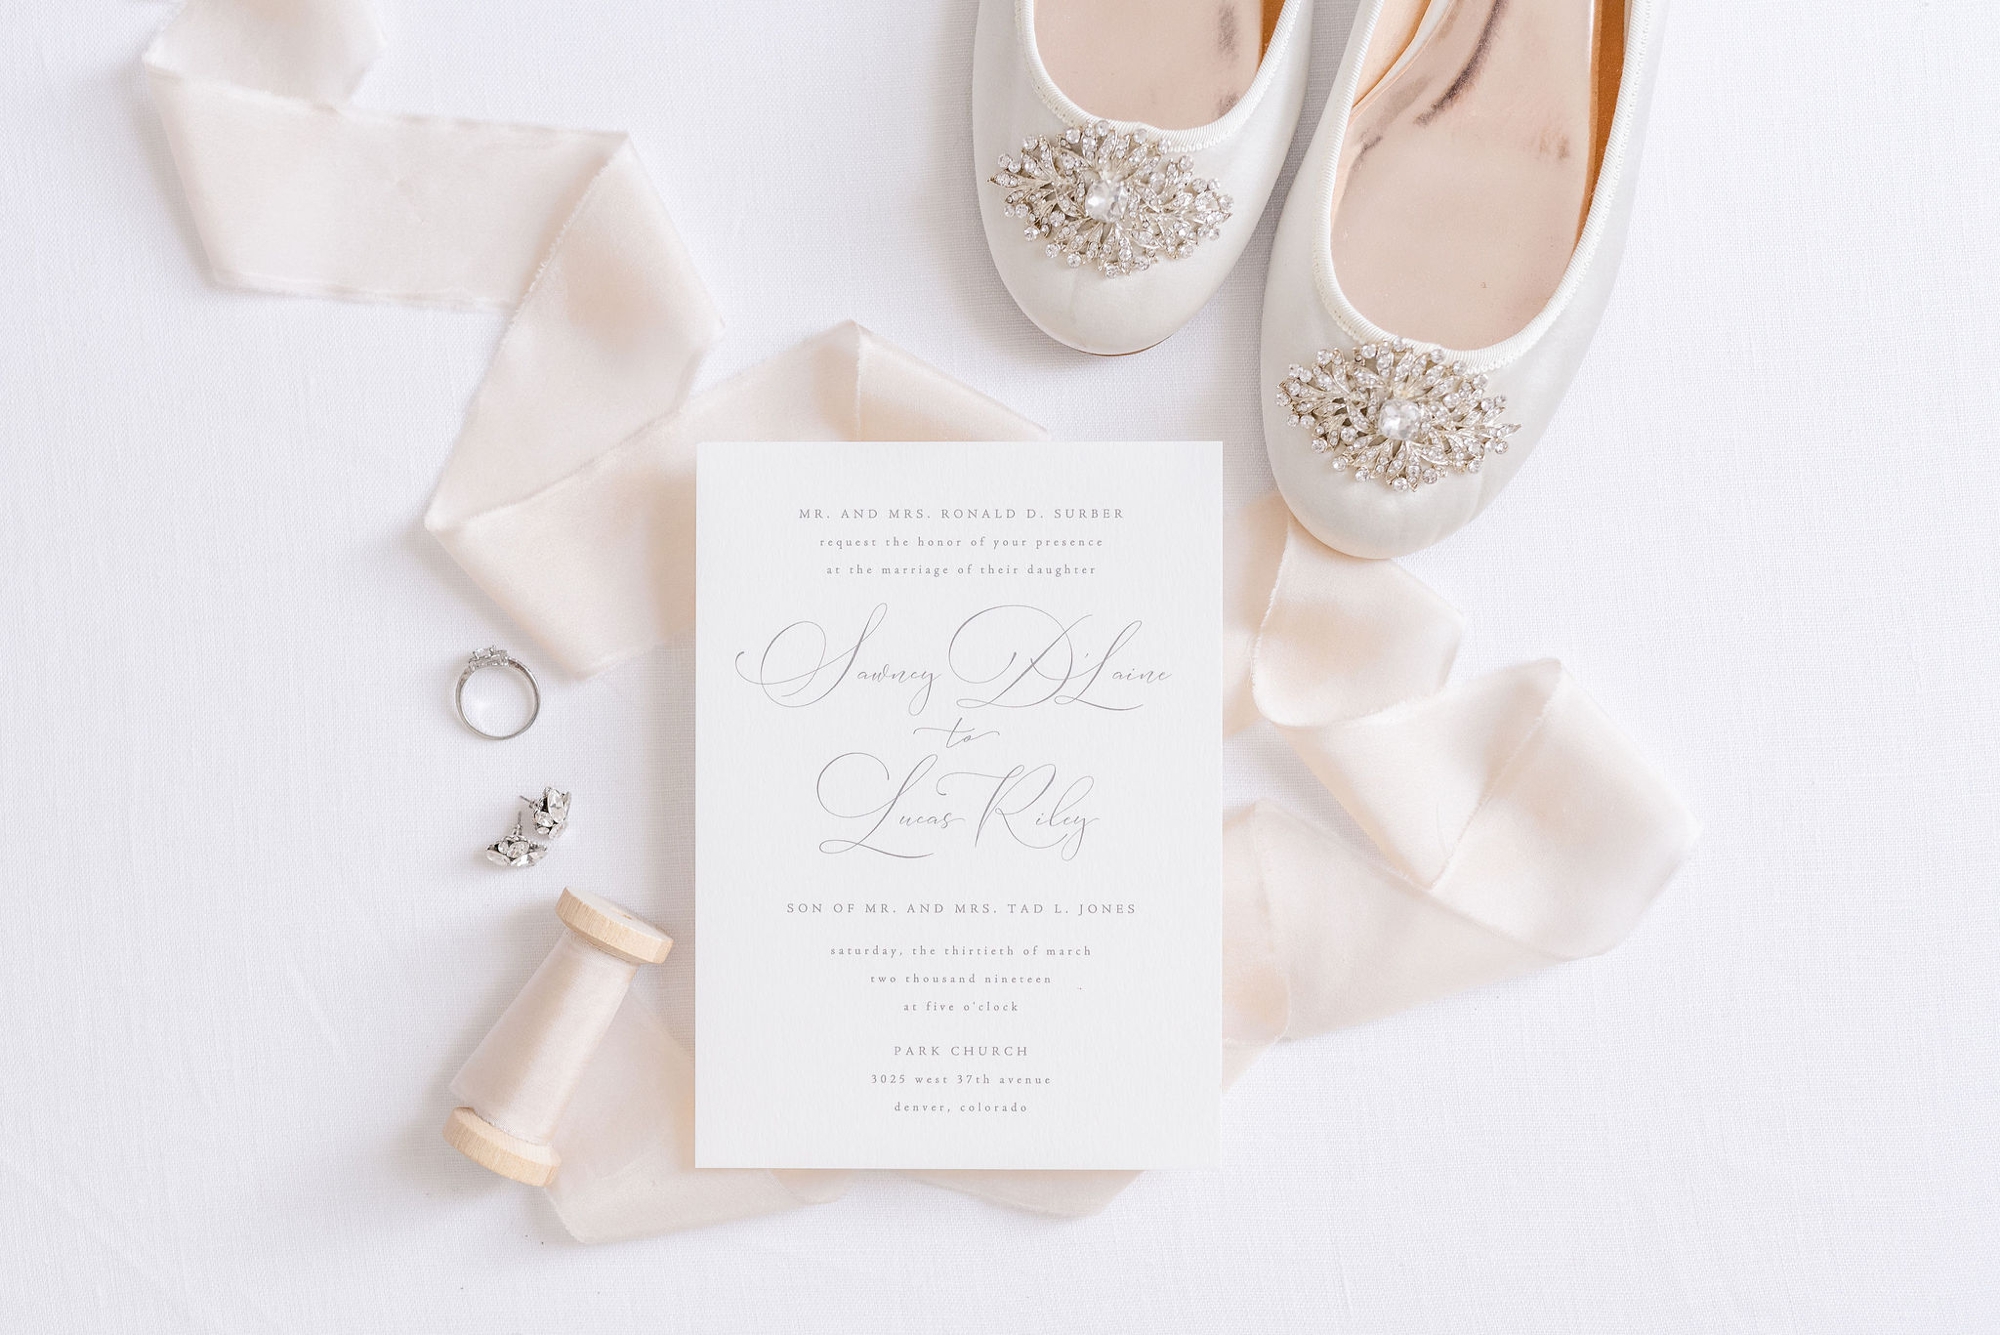 how-to-photograph-wedding-detalis-when-you-don't-have-a-lot